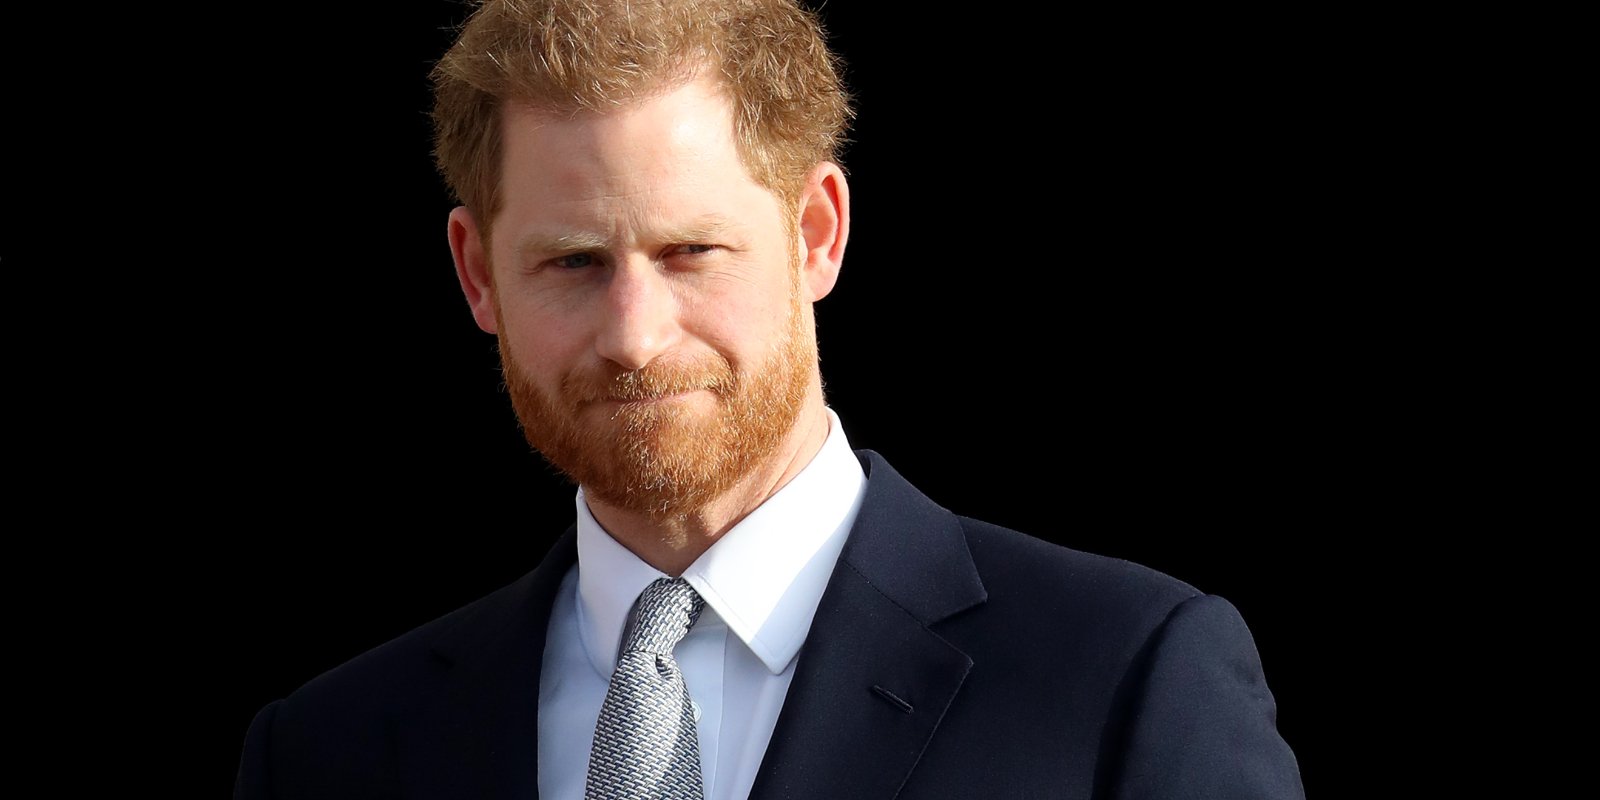 Prince Harry hosts the Rugby League World Cup 2021 draws for the men's, women's and wheelchair tournaments at Buckingham Palace on January 16, 2020 in London, England.